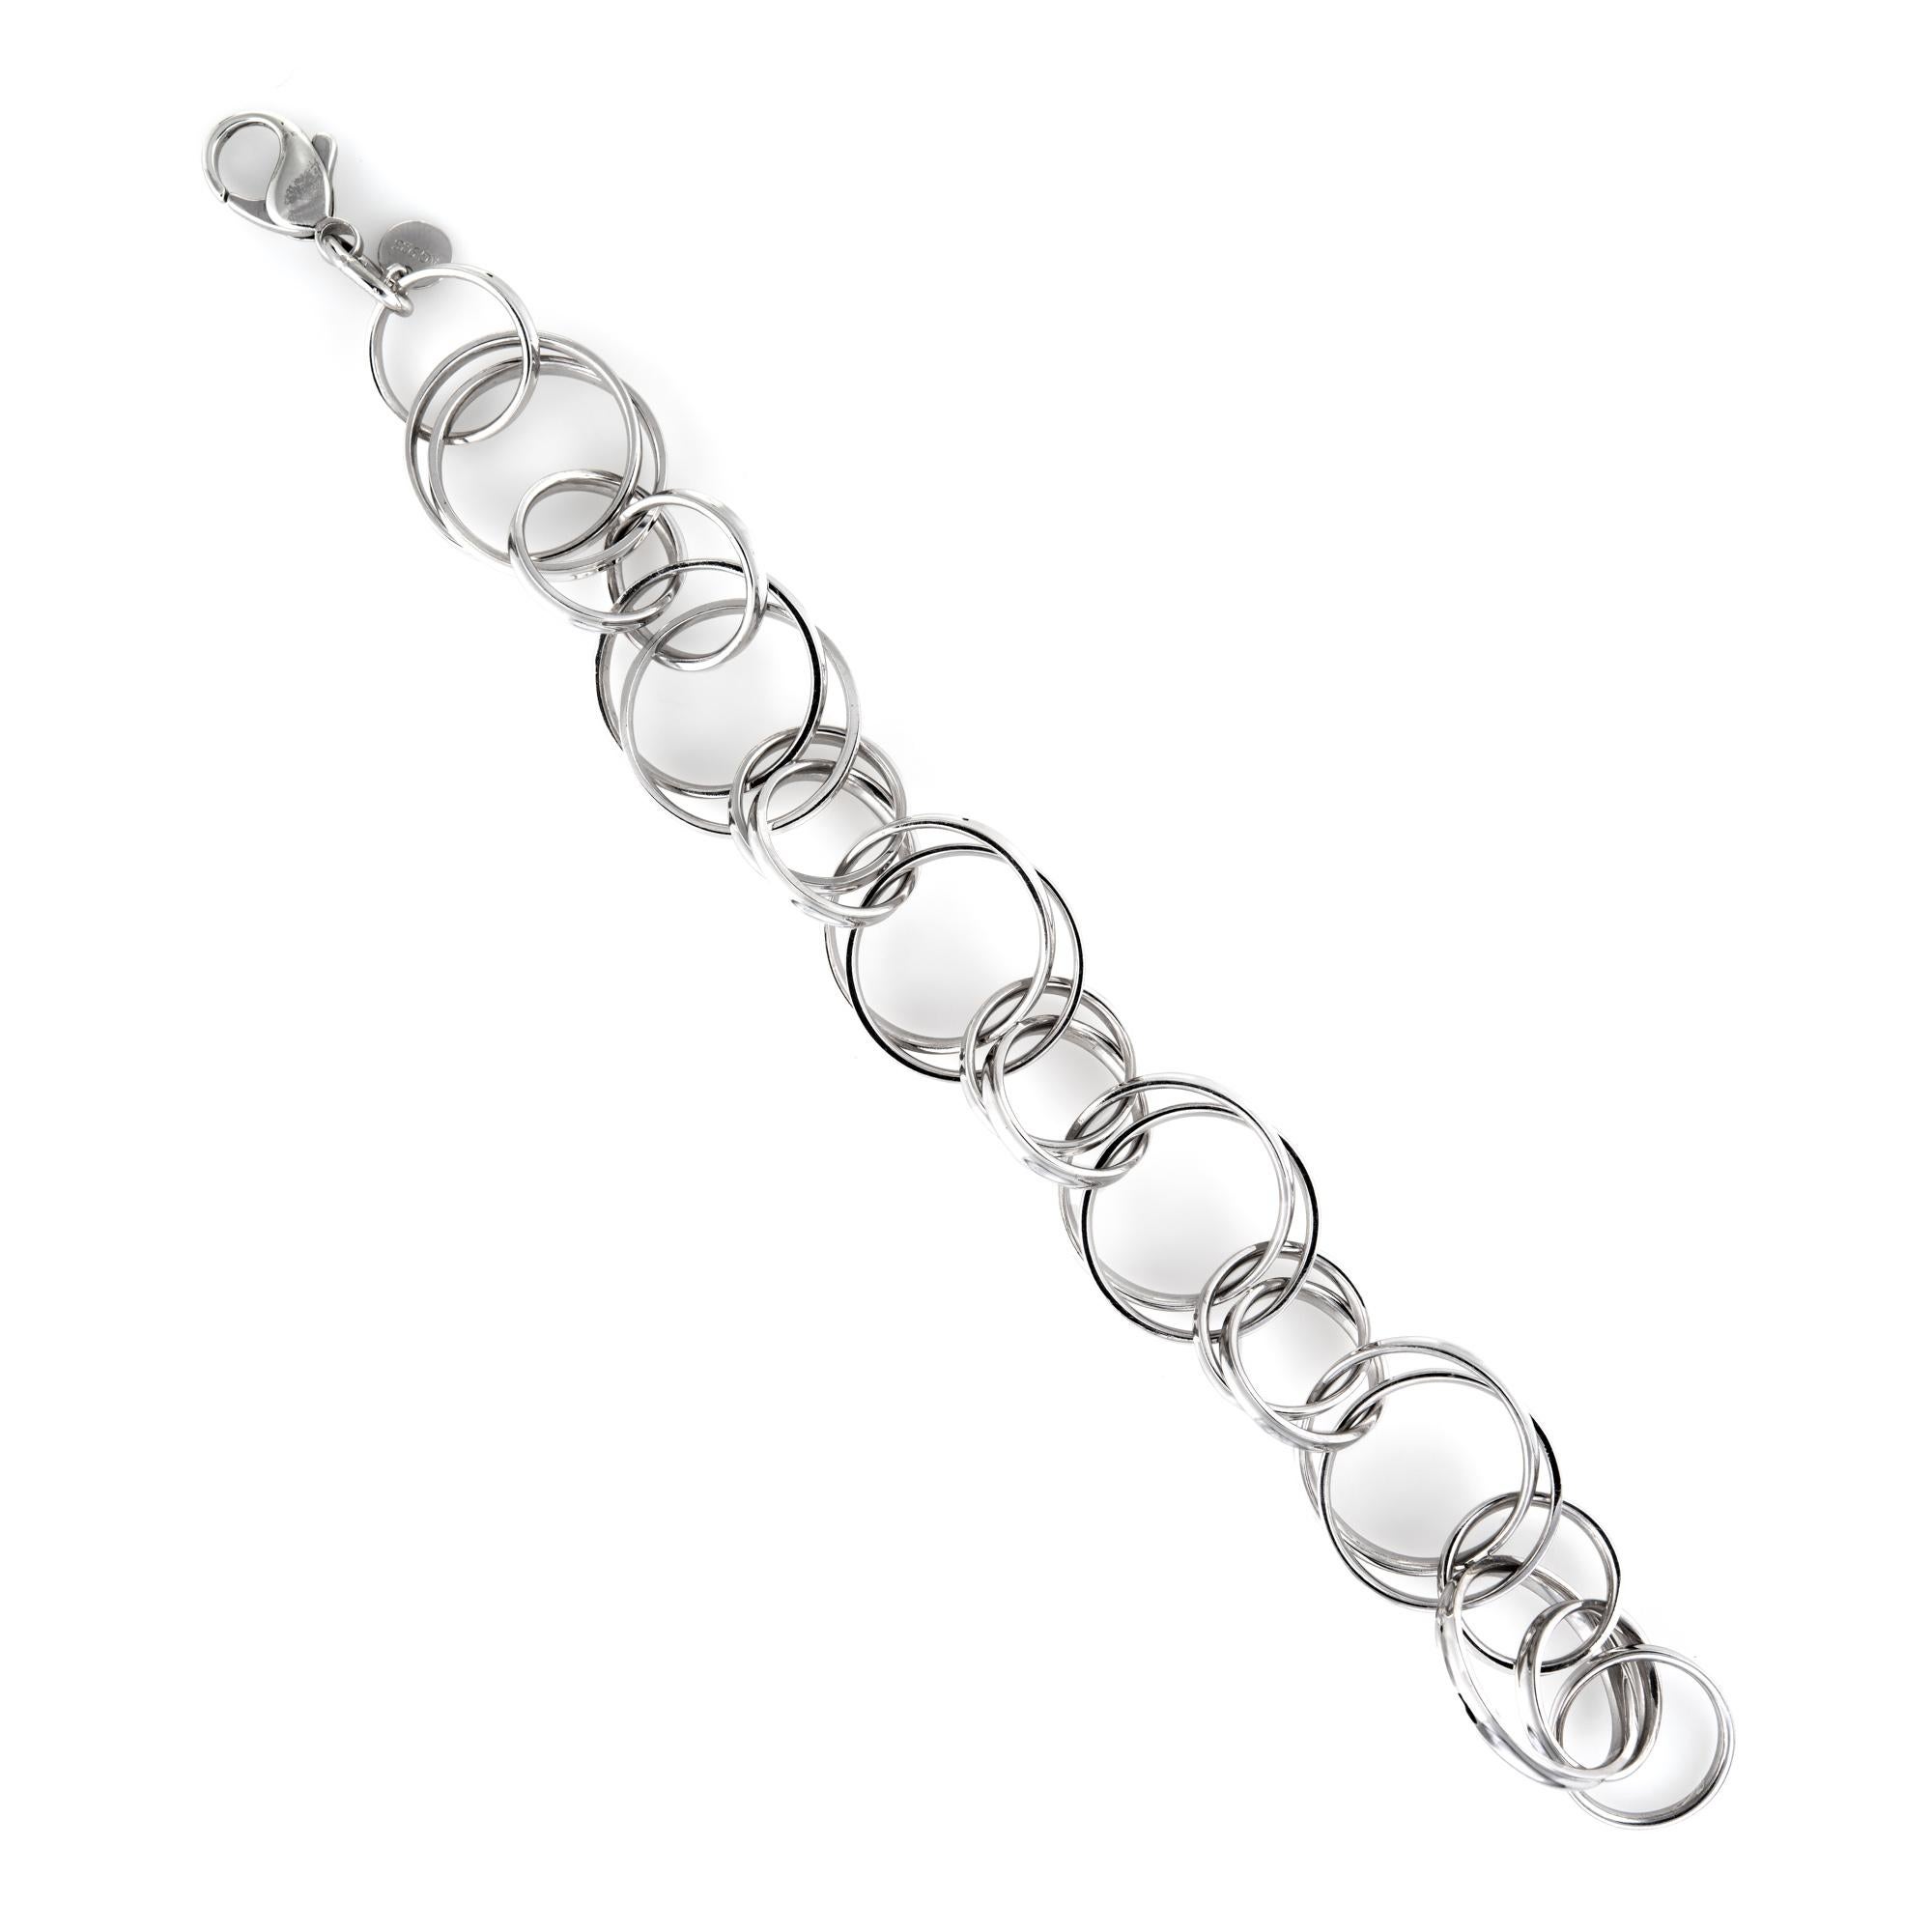 Elegant pre owned Tiffany & Co bracelet, crafted in 925 sterling silver. 

The bracelet is comprised of multiple rings of beveled circles that graduate in size from 20mm to 15mm.  

The bracelet is in excellent original condition and was recently